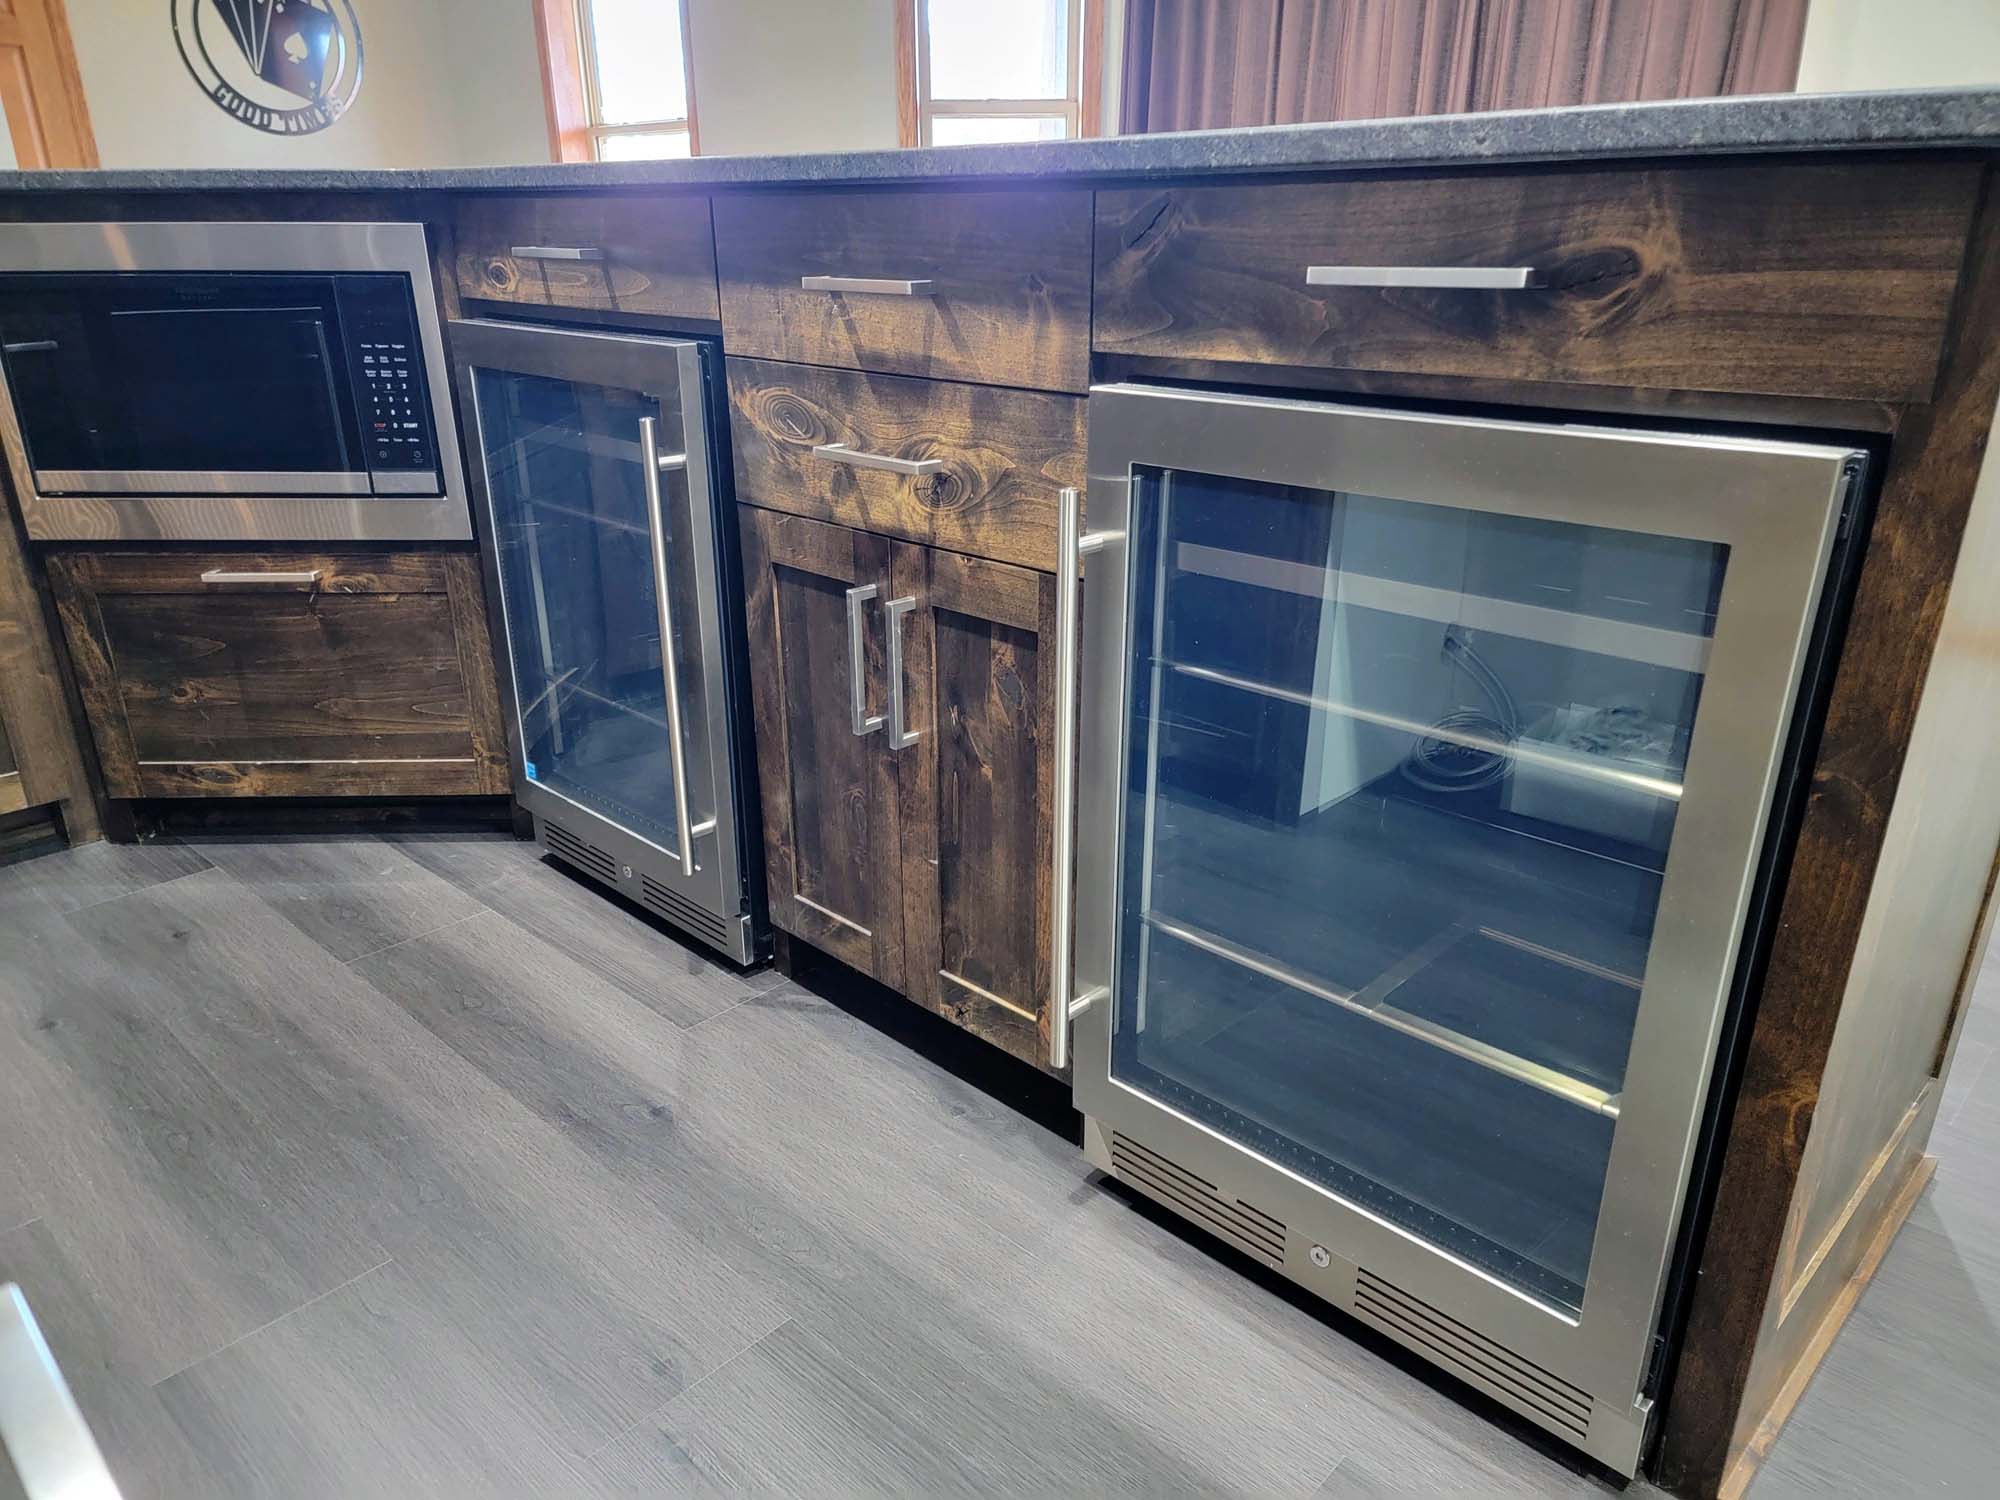 Built-in wine coolers and microwave